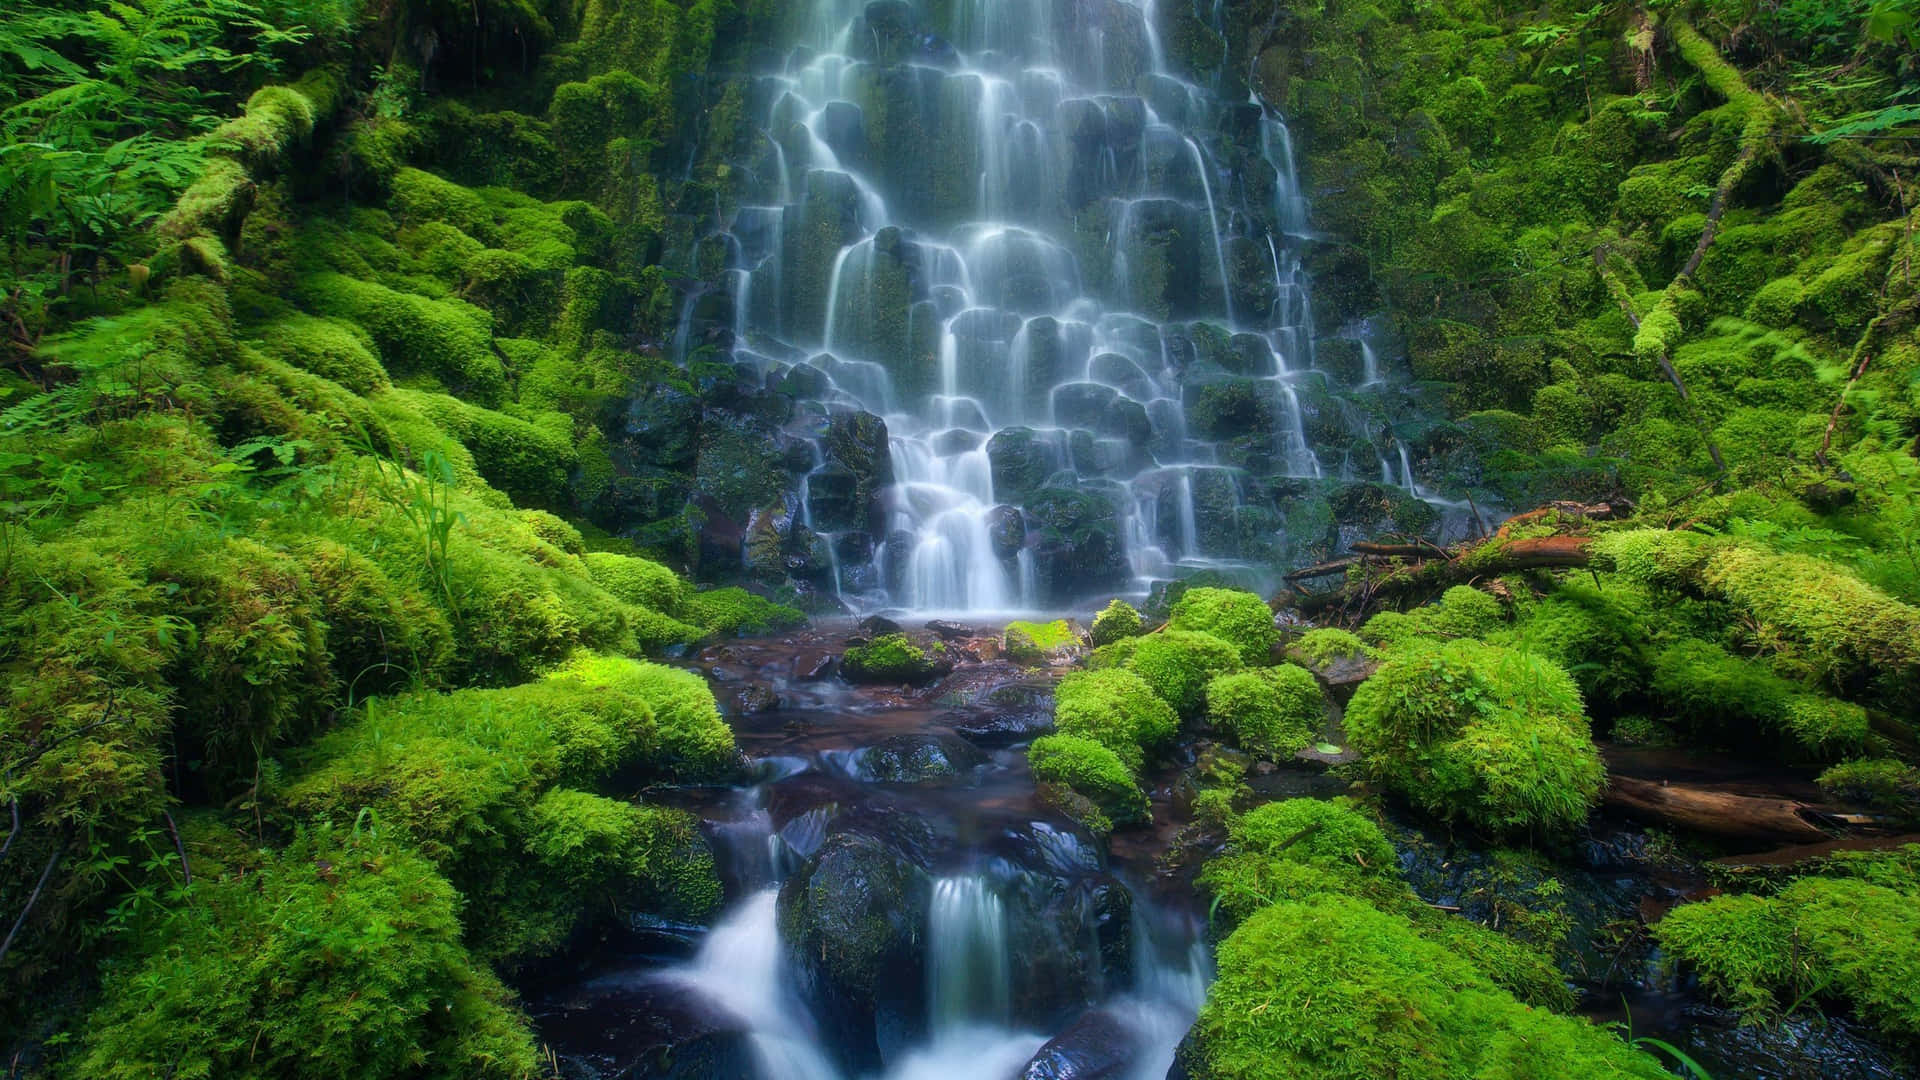 "Take a Moment to Rejuvenate by the Sight of This Waterfall"